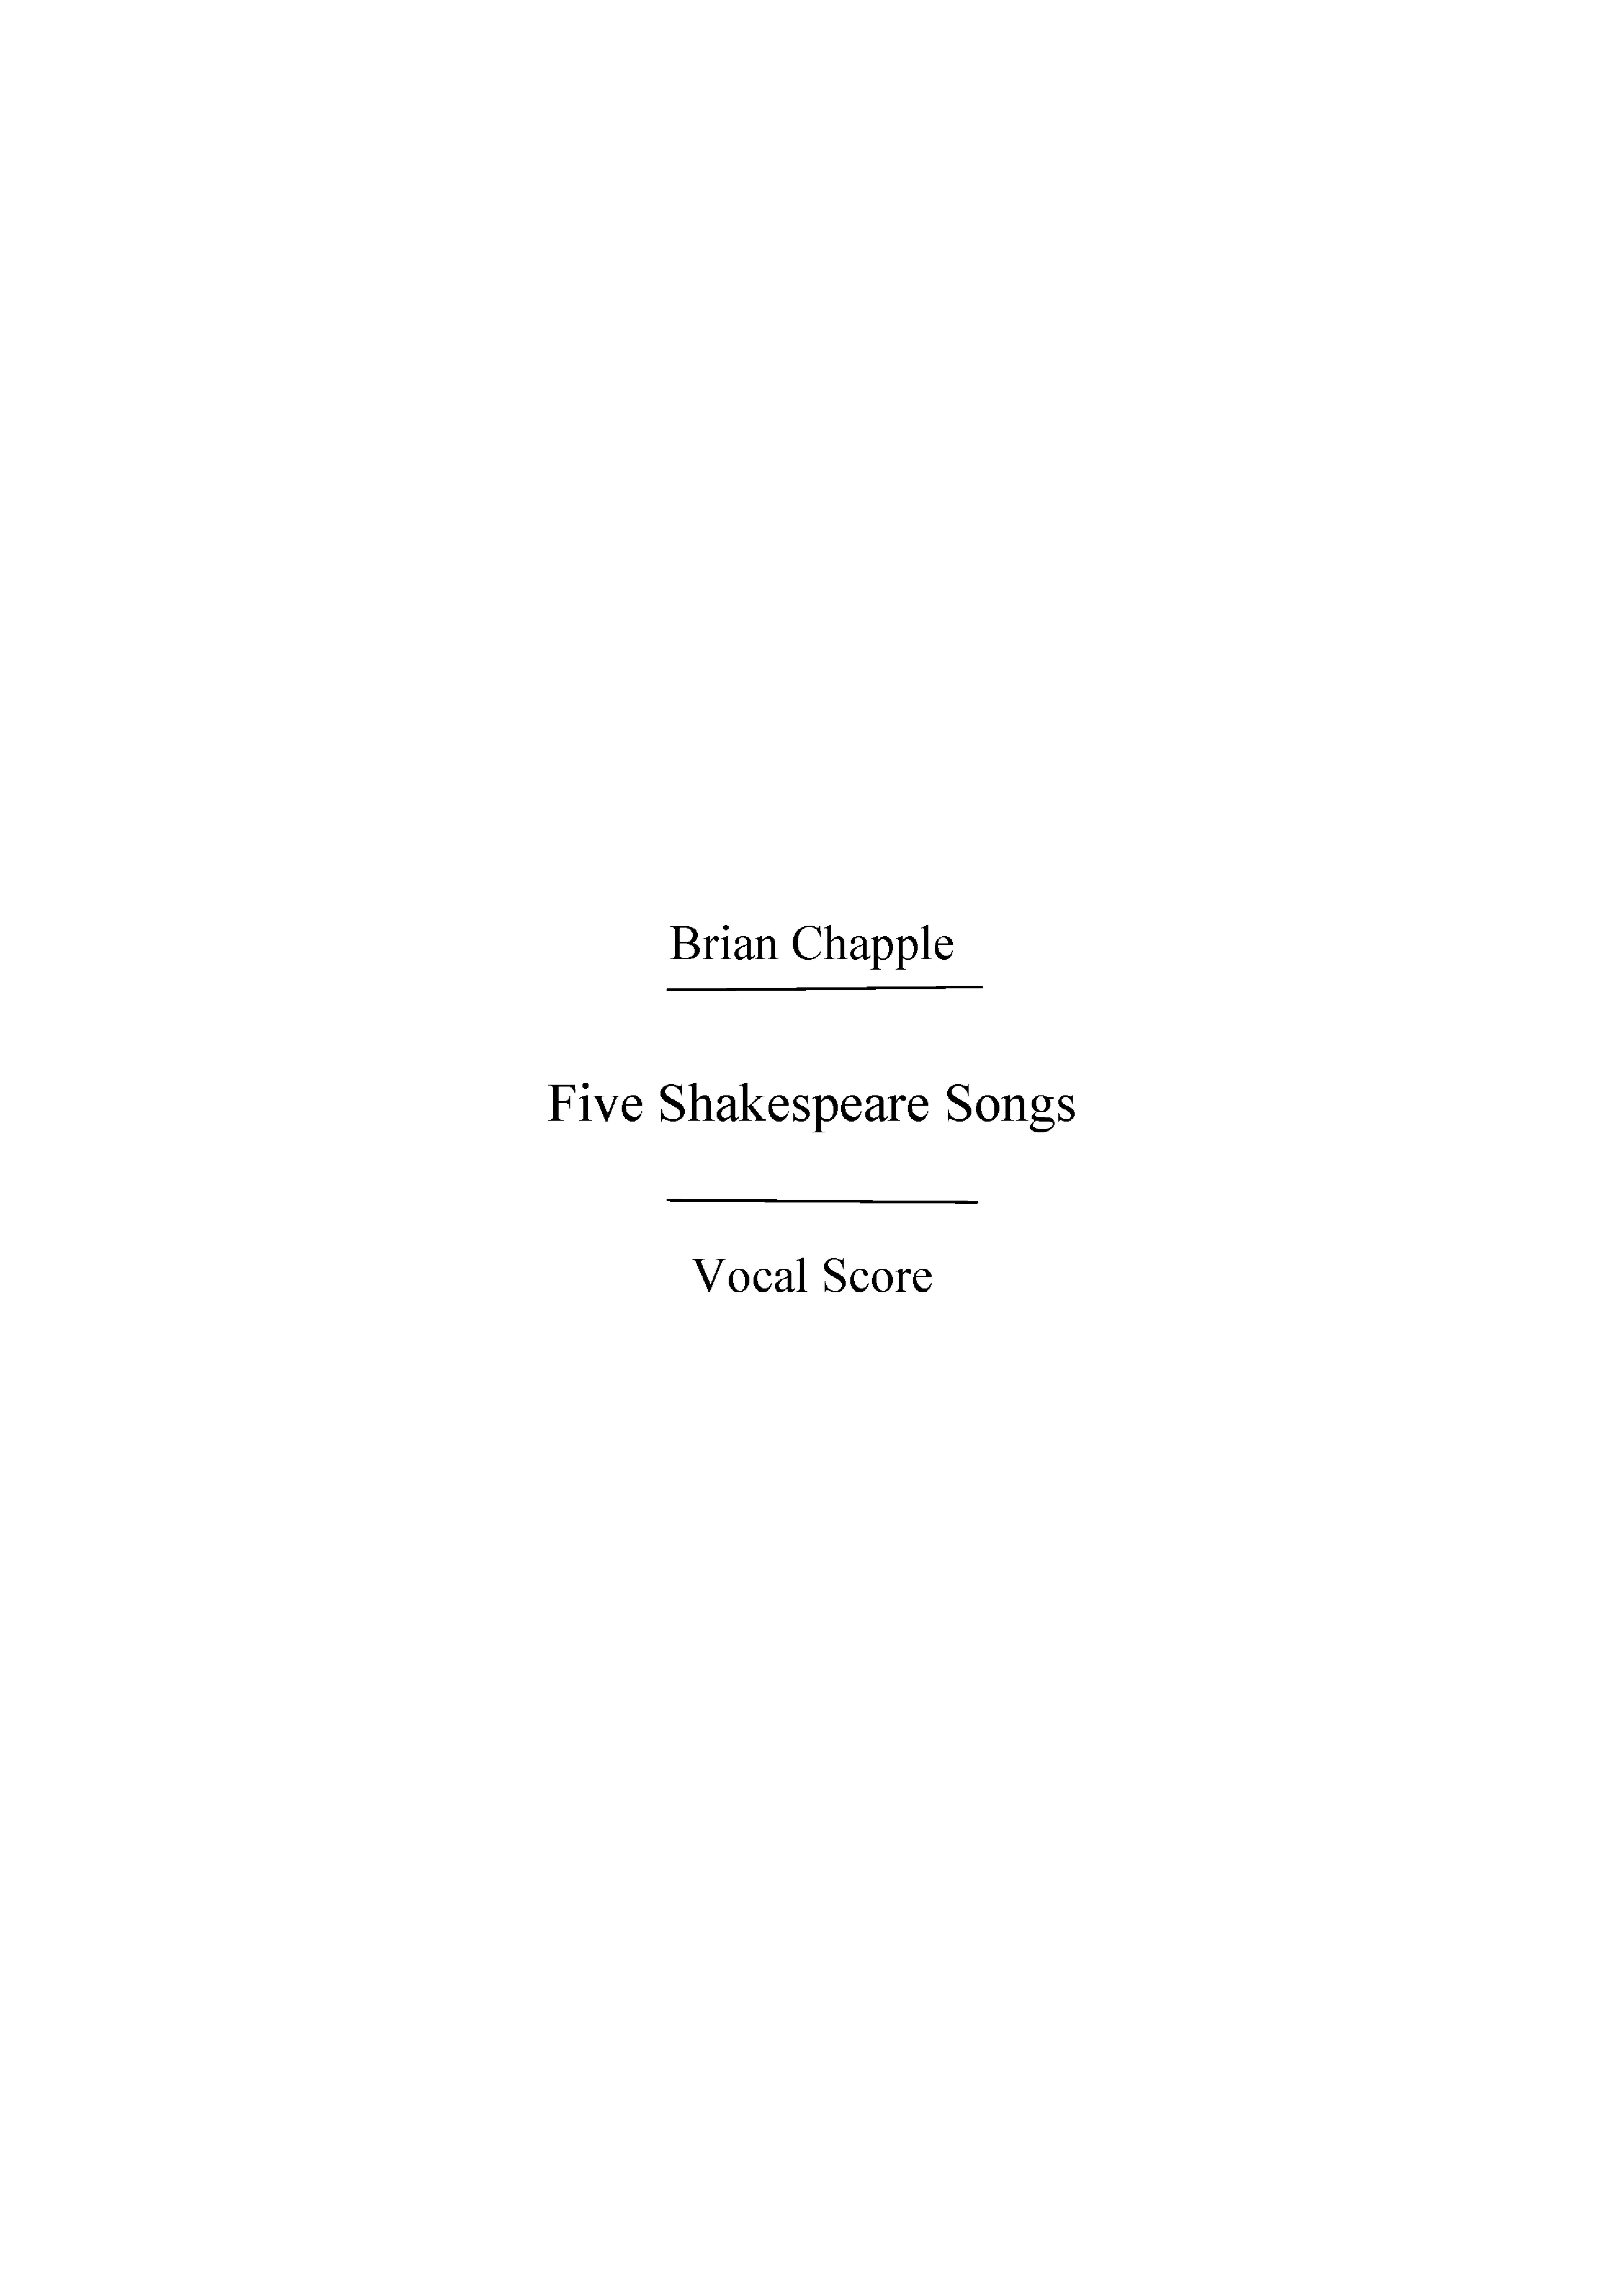 Brian Chapple: Five Shakespeare Songs (1982): Vocal: Vocal Score